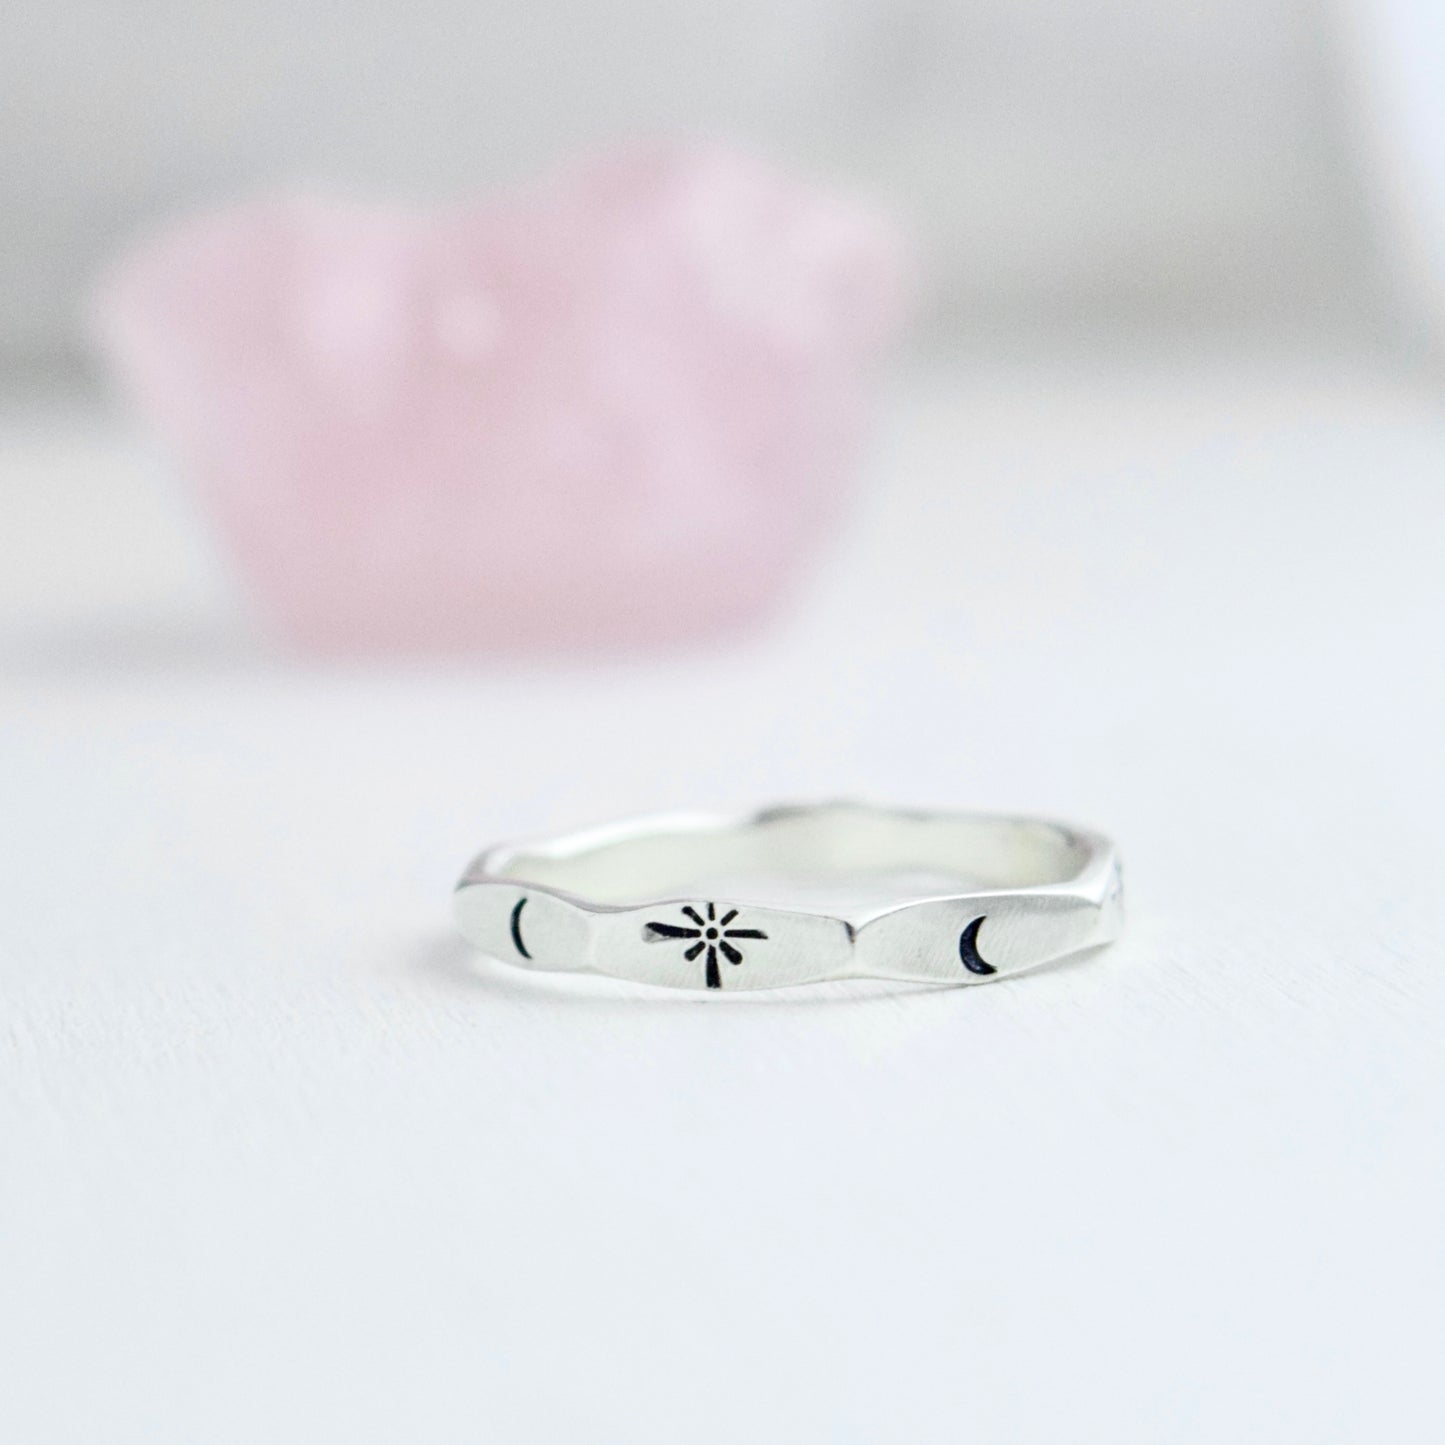 Stamped Celestial Ring size 10